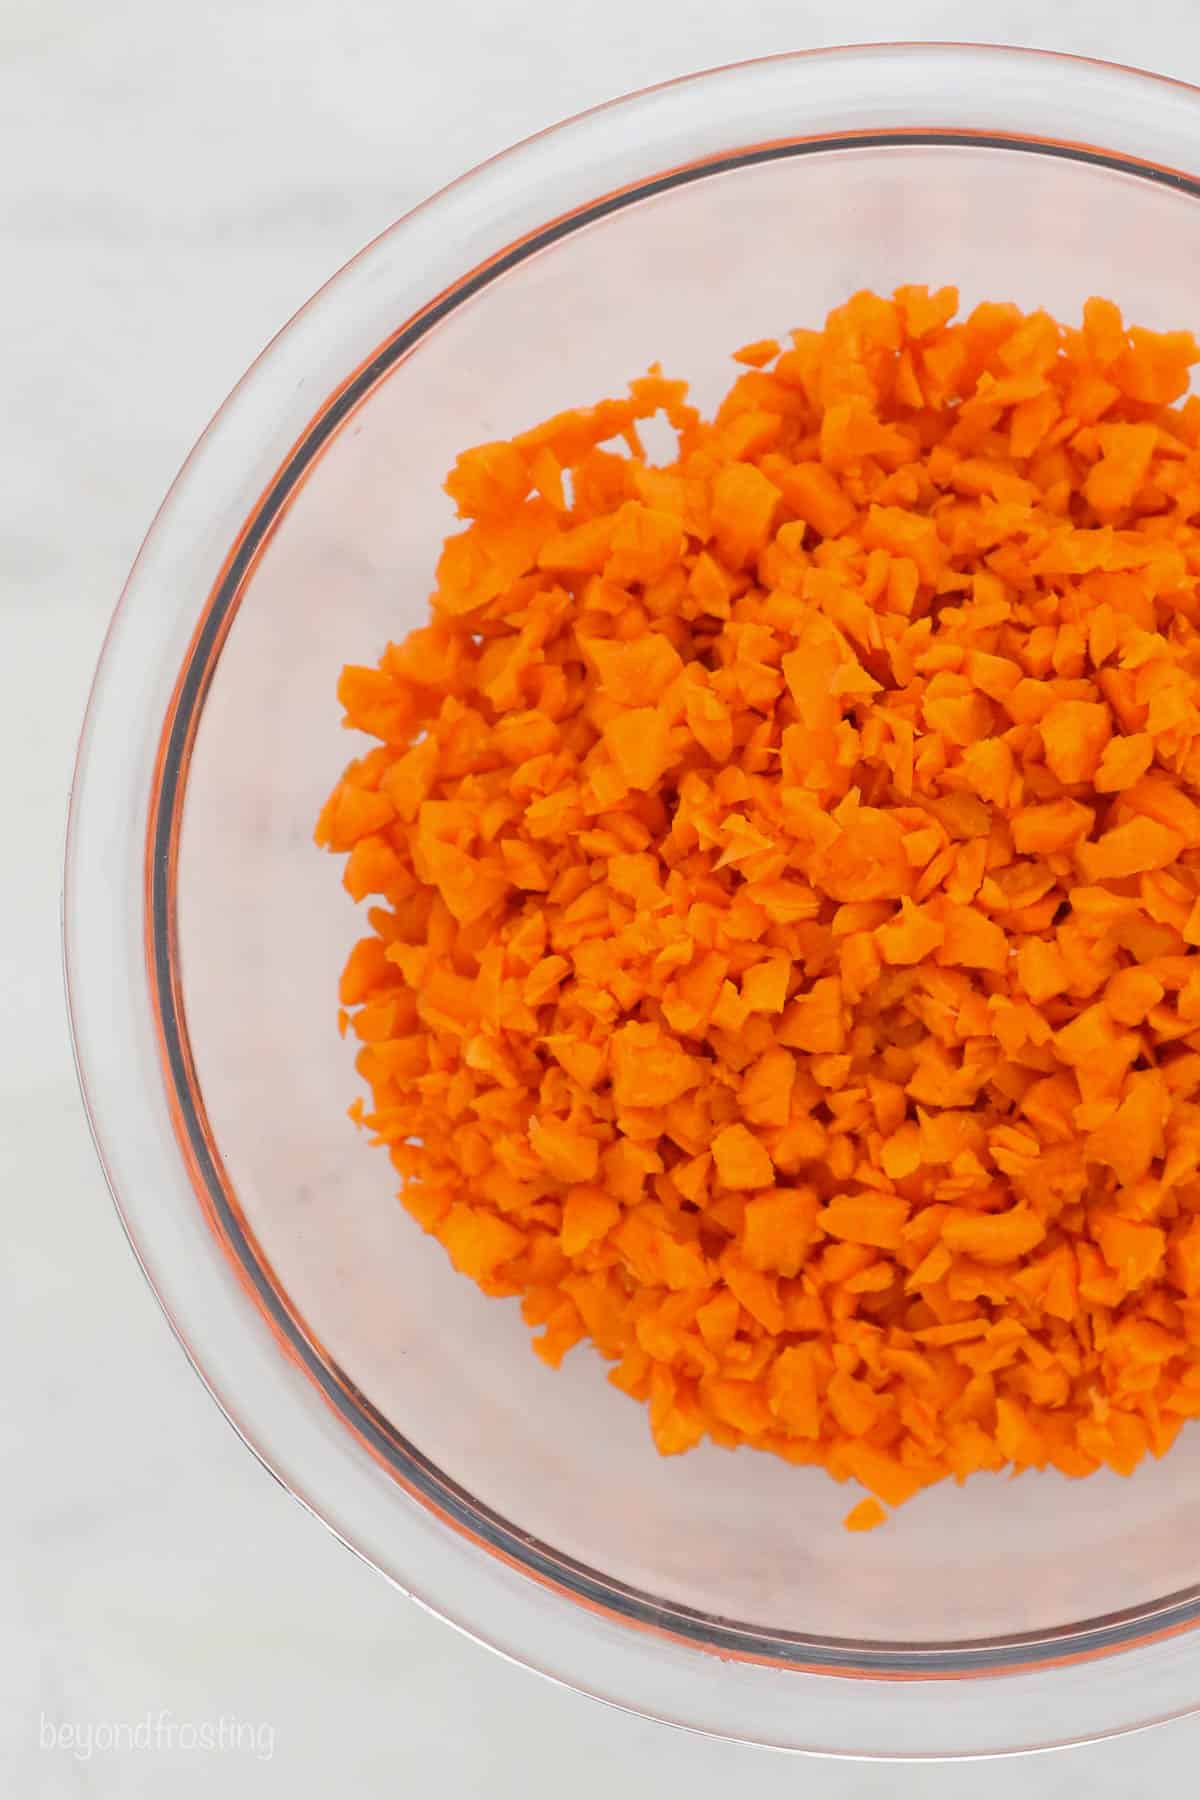 Shredded carrots in a glass bowl